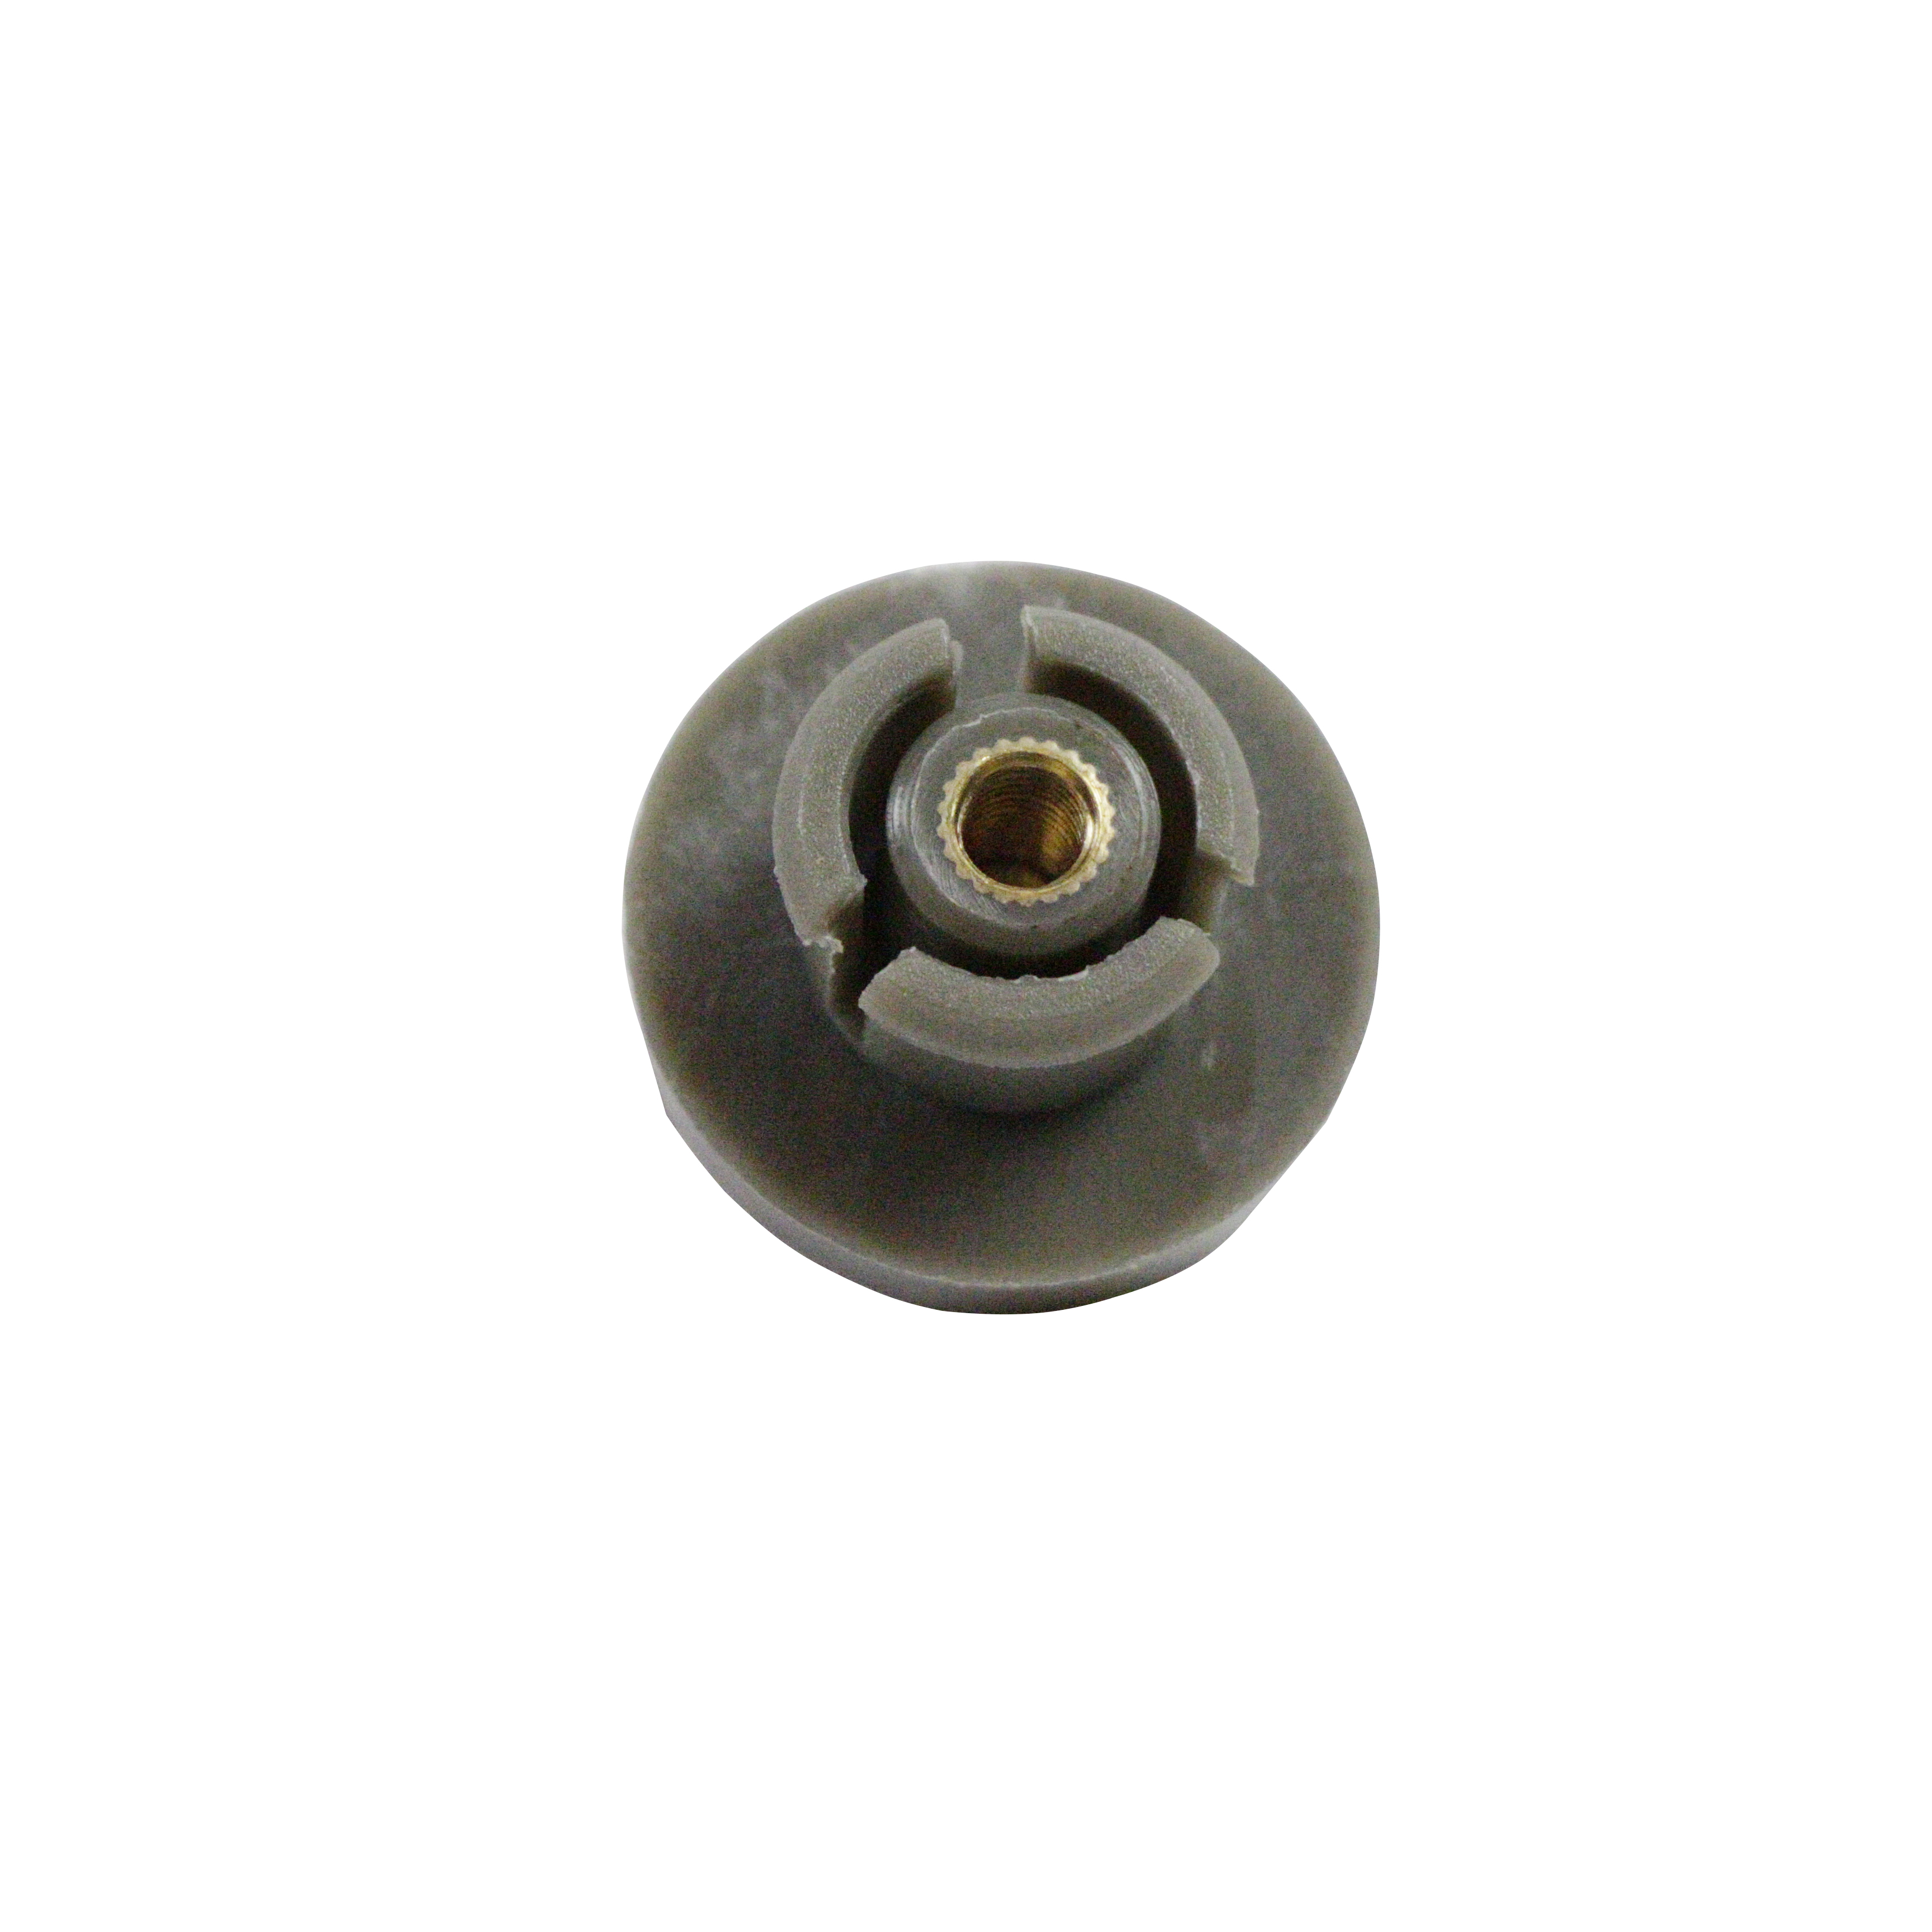 Air Filter Cover Twist Lock Knob And Gasket For Joncutter G3800 Chainsaw